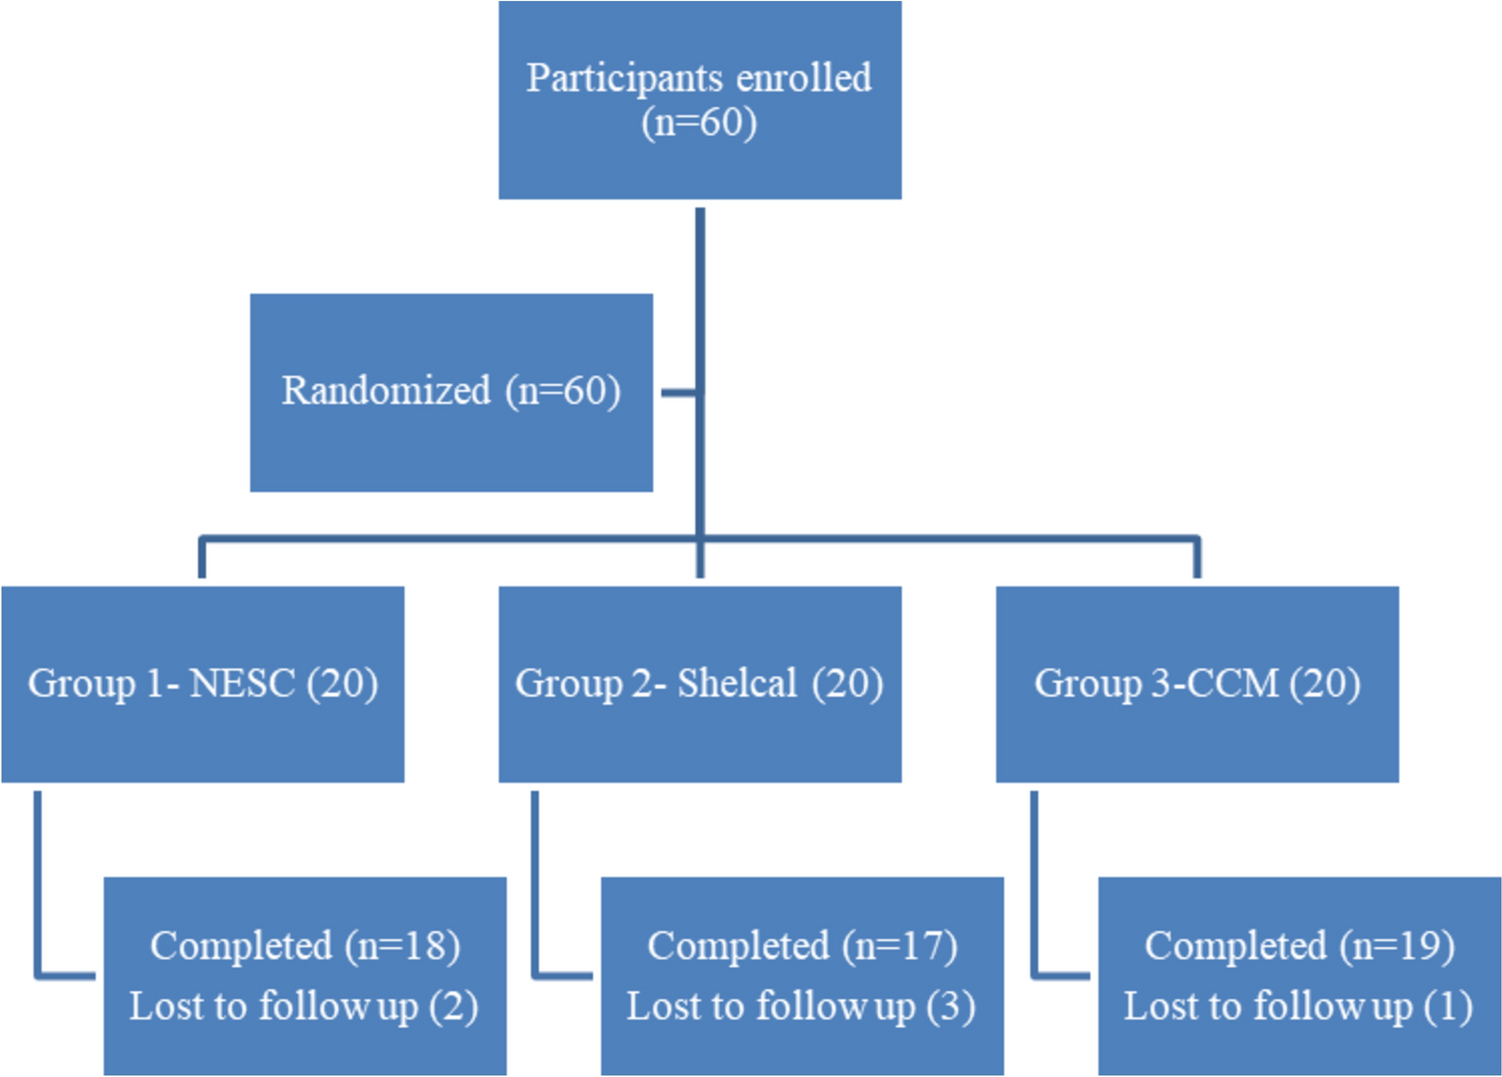 Comparative Evaluation of Bioavailability, Efficacy and Safety of MICROCORE NESC® with Calcium Carbonate and Calcium Citrate Malate in Osteopenic and Osteoporotic Patients: A Randomized Clinical Trial